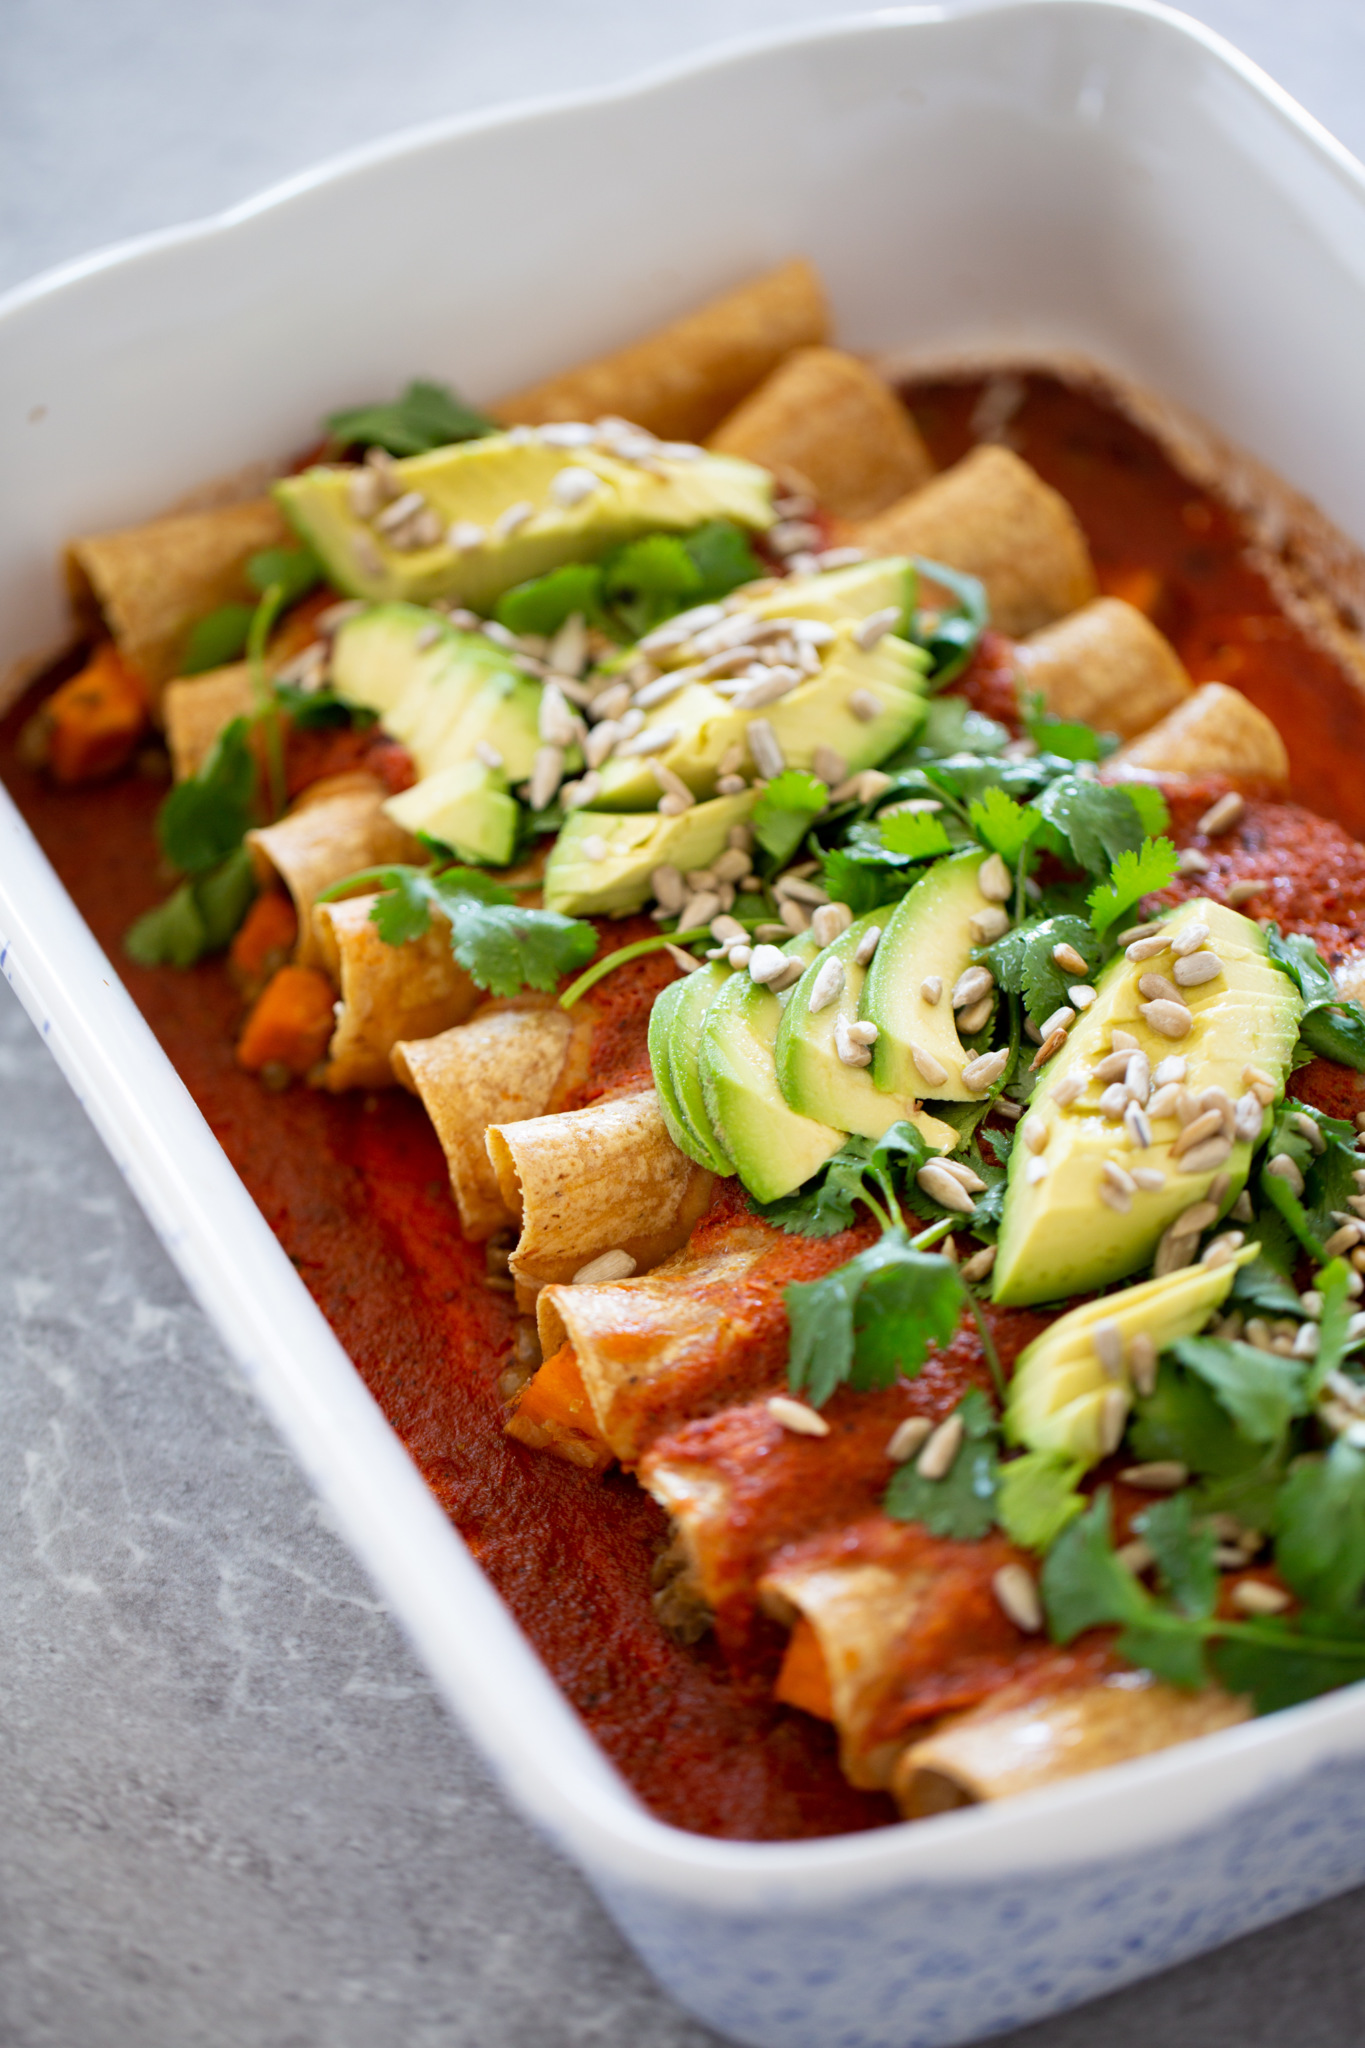 vegan enchiladas filled with lentils and sweet potatotoes